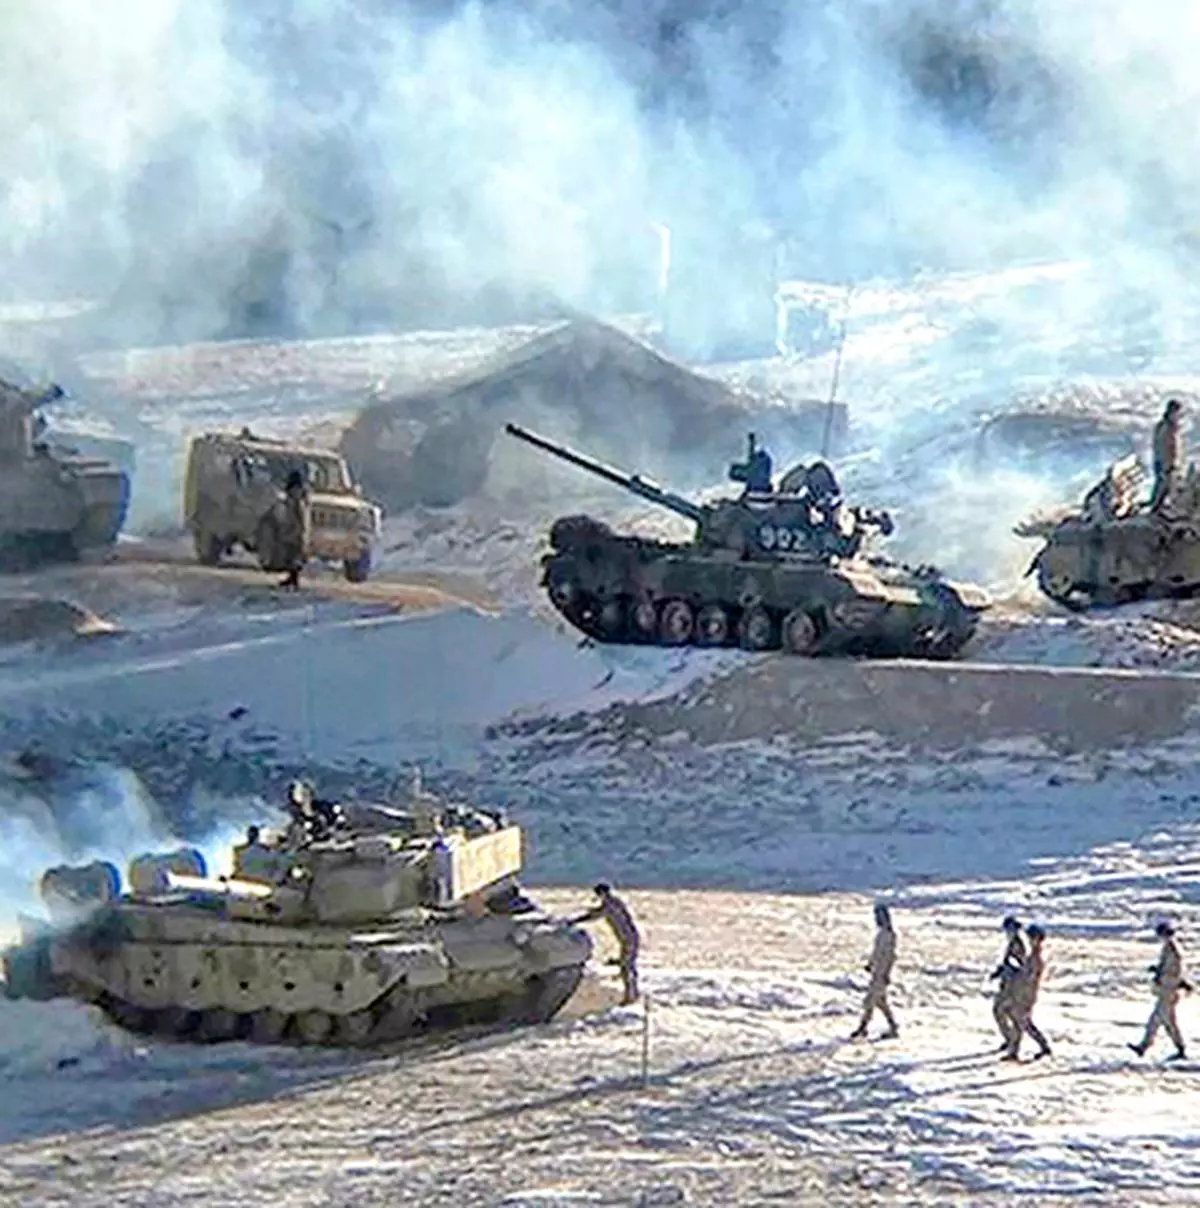 In this undated handout photograph released by the Indian Army on February 16, 2021, shows People Liberation Army (PLA) soldiers and tanks during military disengagement along the Line of Actual Control (LAC) at the India-China border in Ladakh